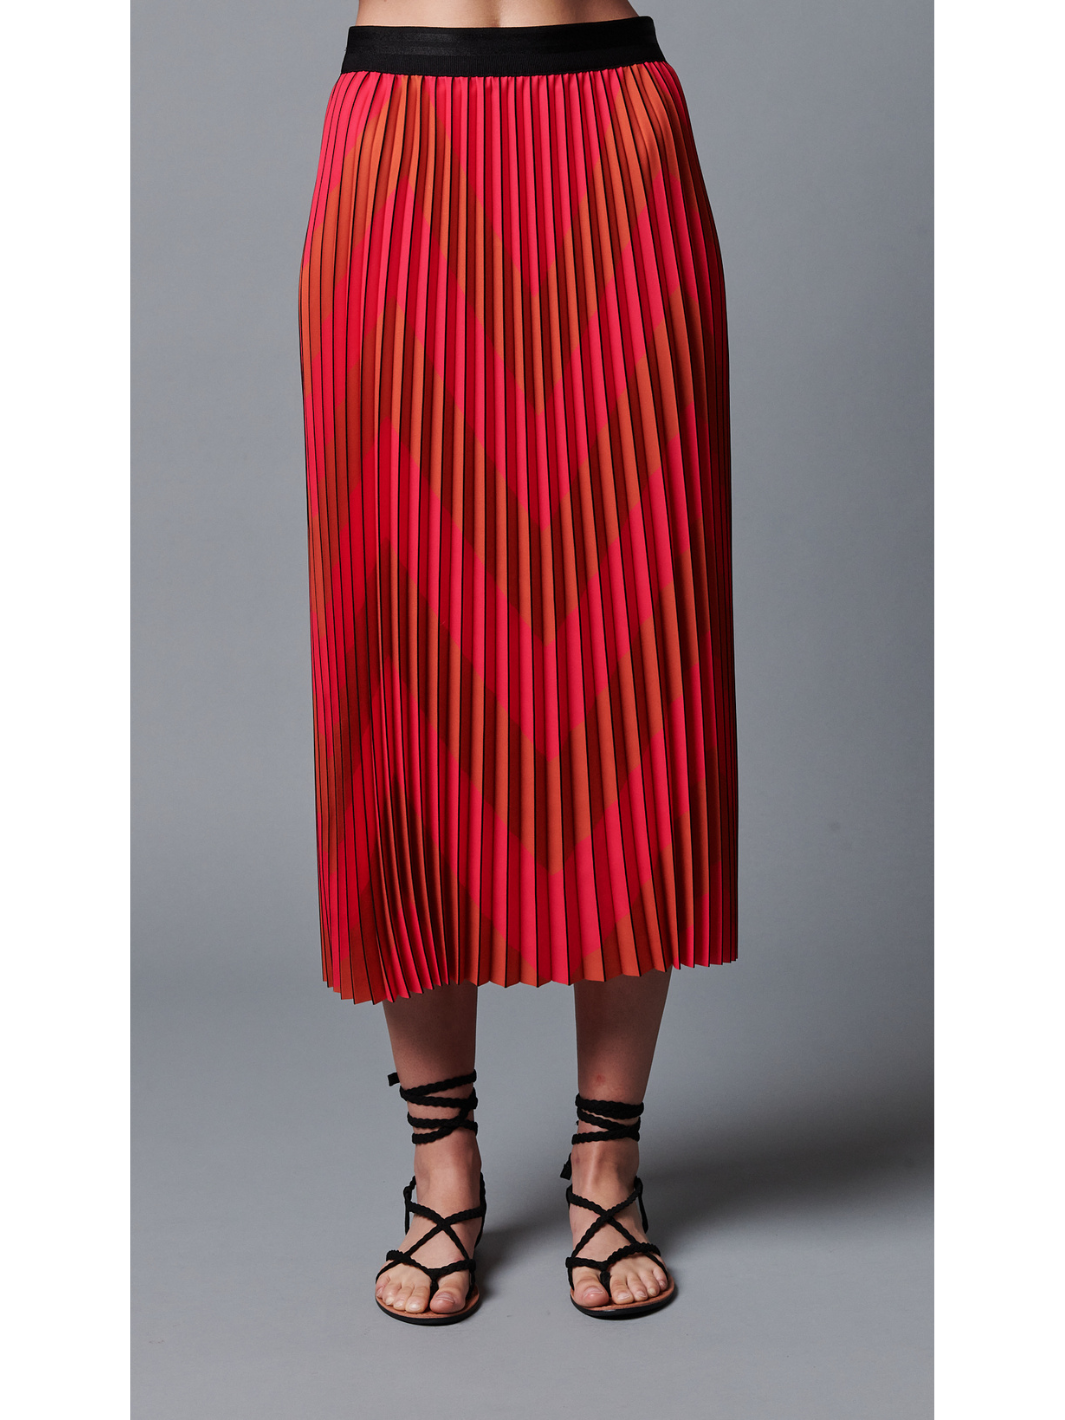 CHEVRON PLEATED SKIRT IN PINK RED - Romi Boutique